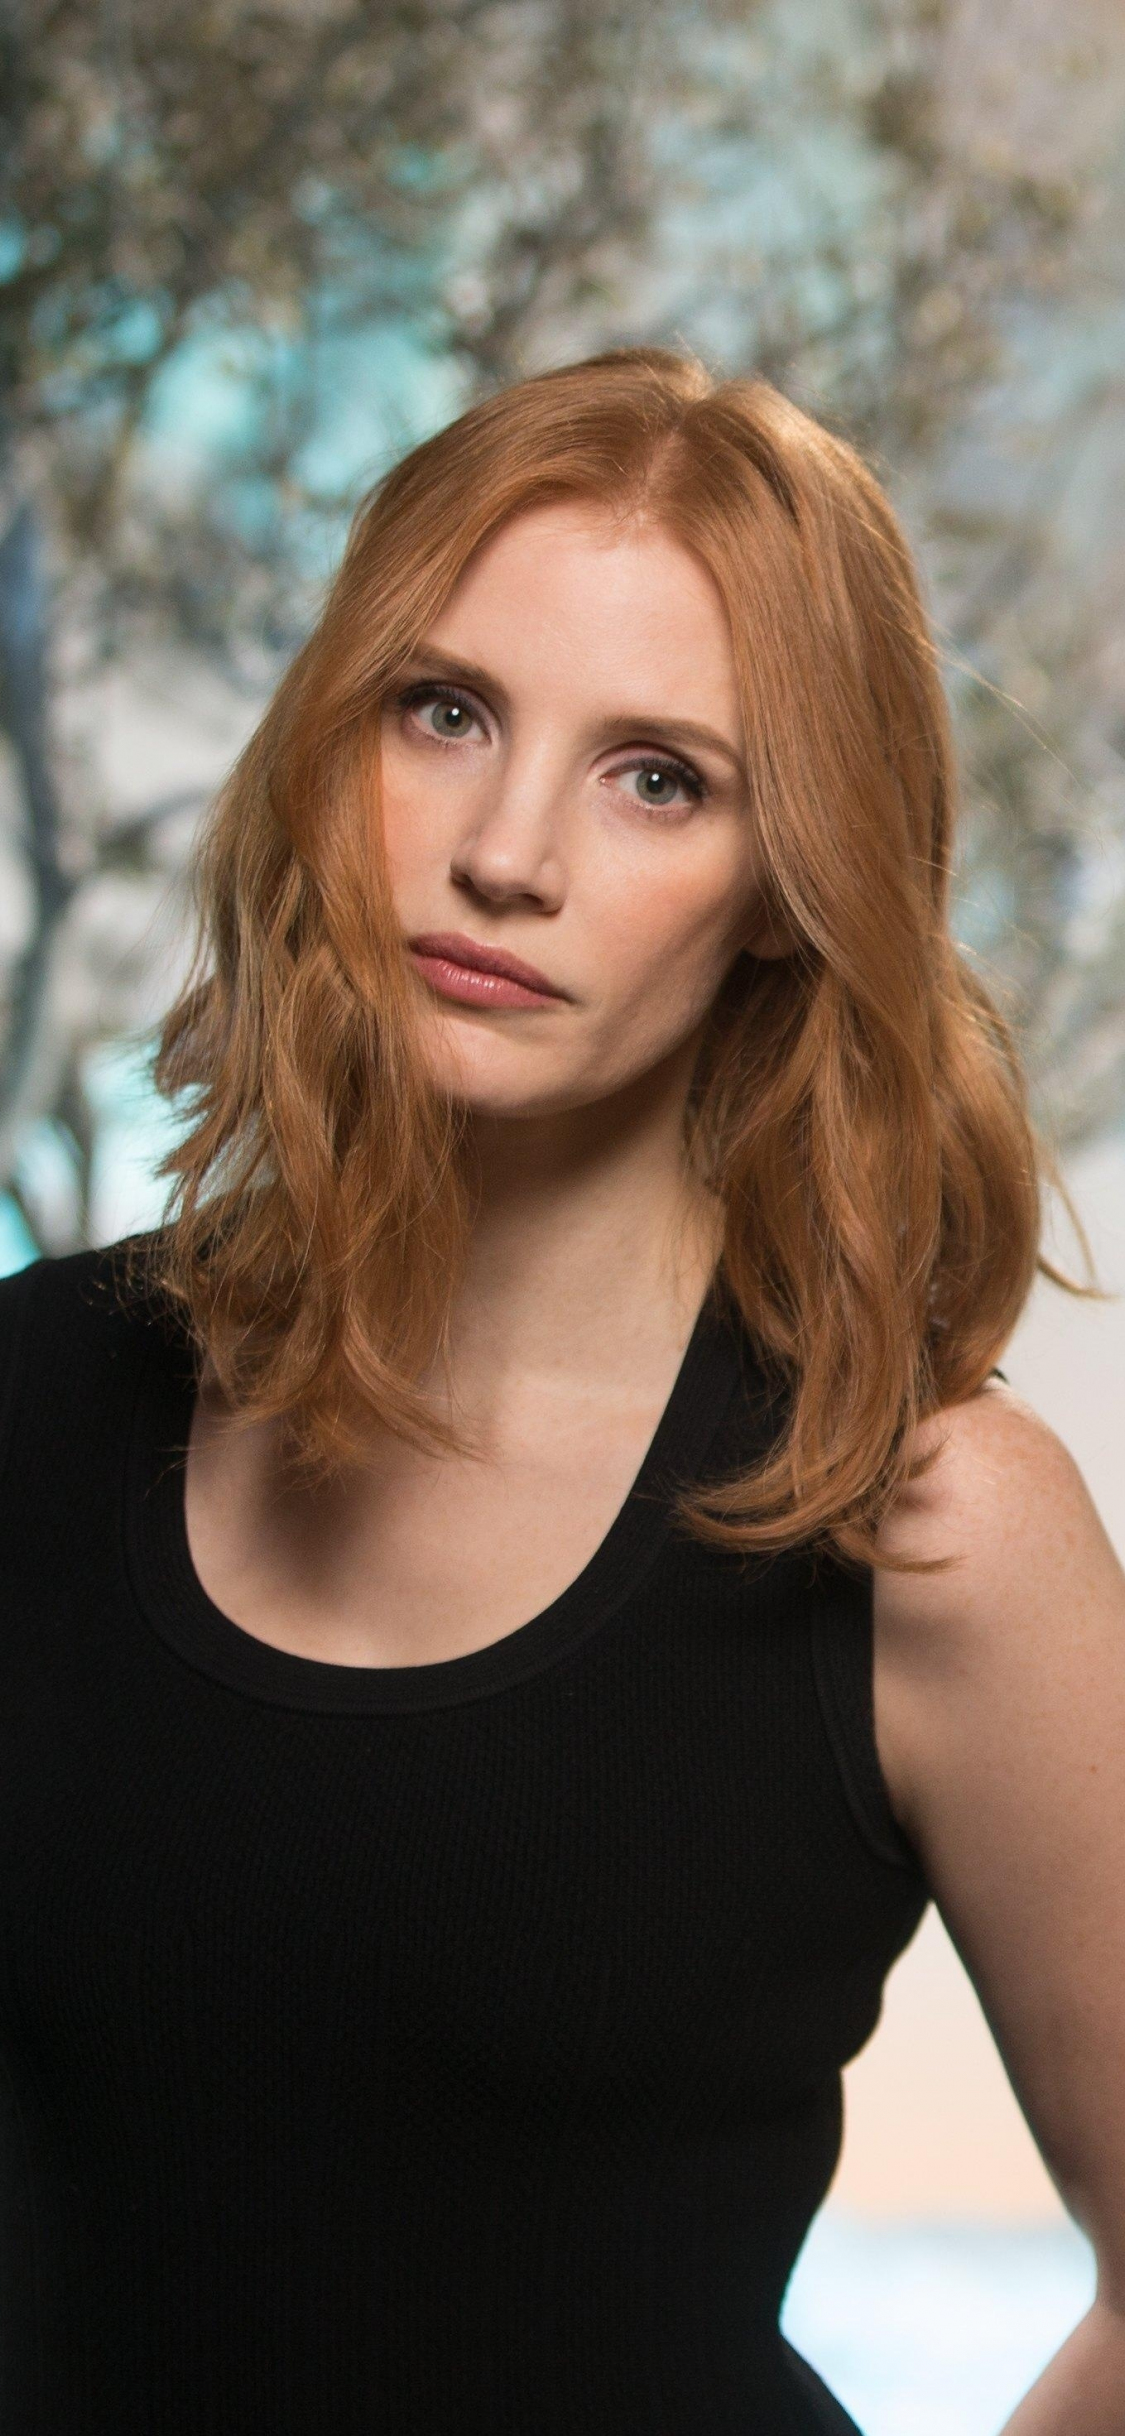 Jessica Chastain Beautiful Redhead Wallpapers